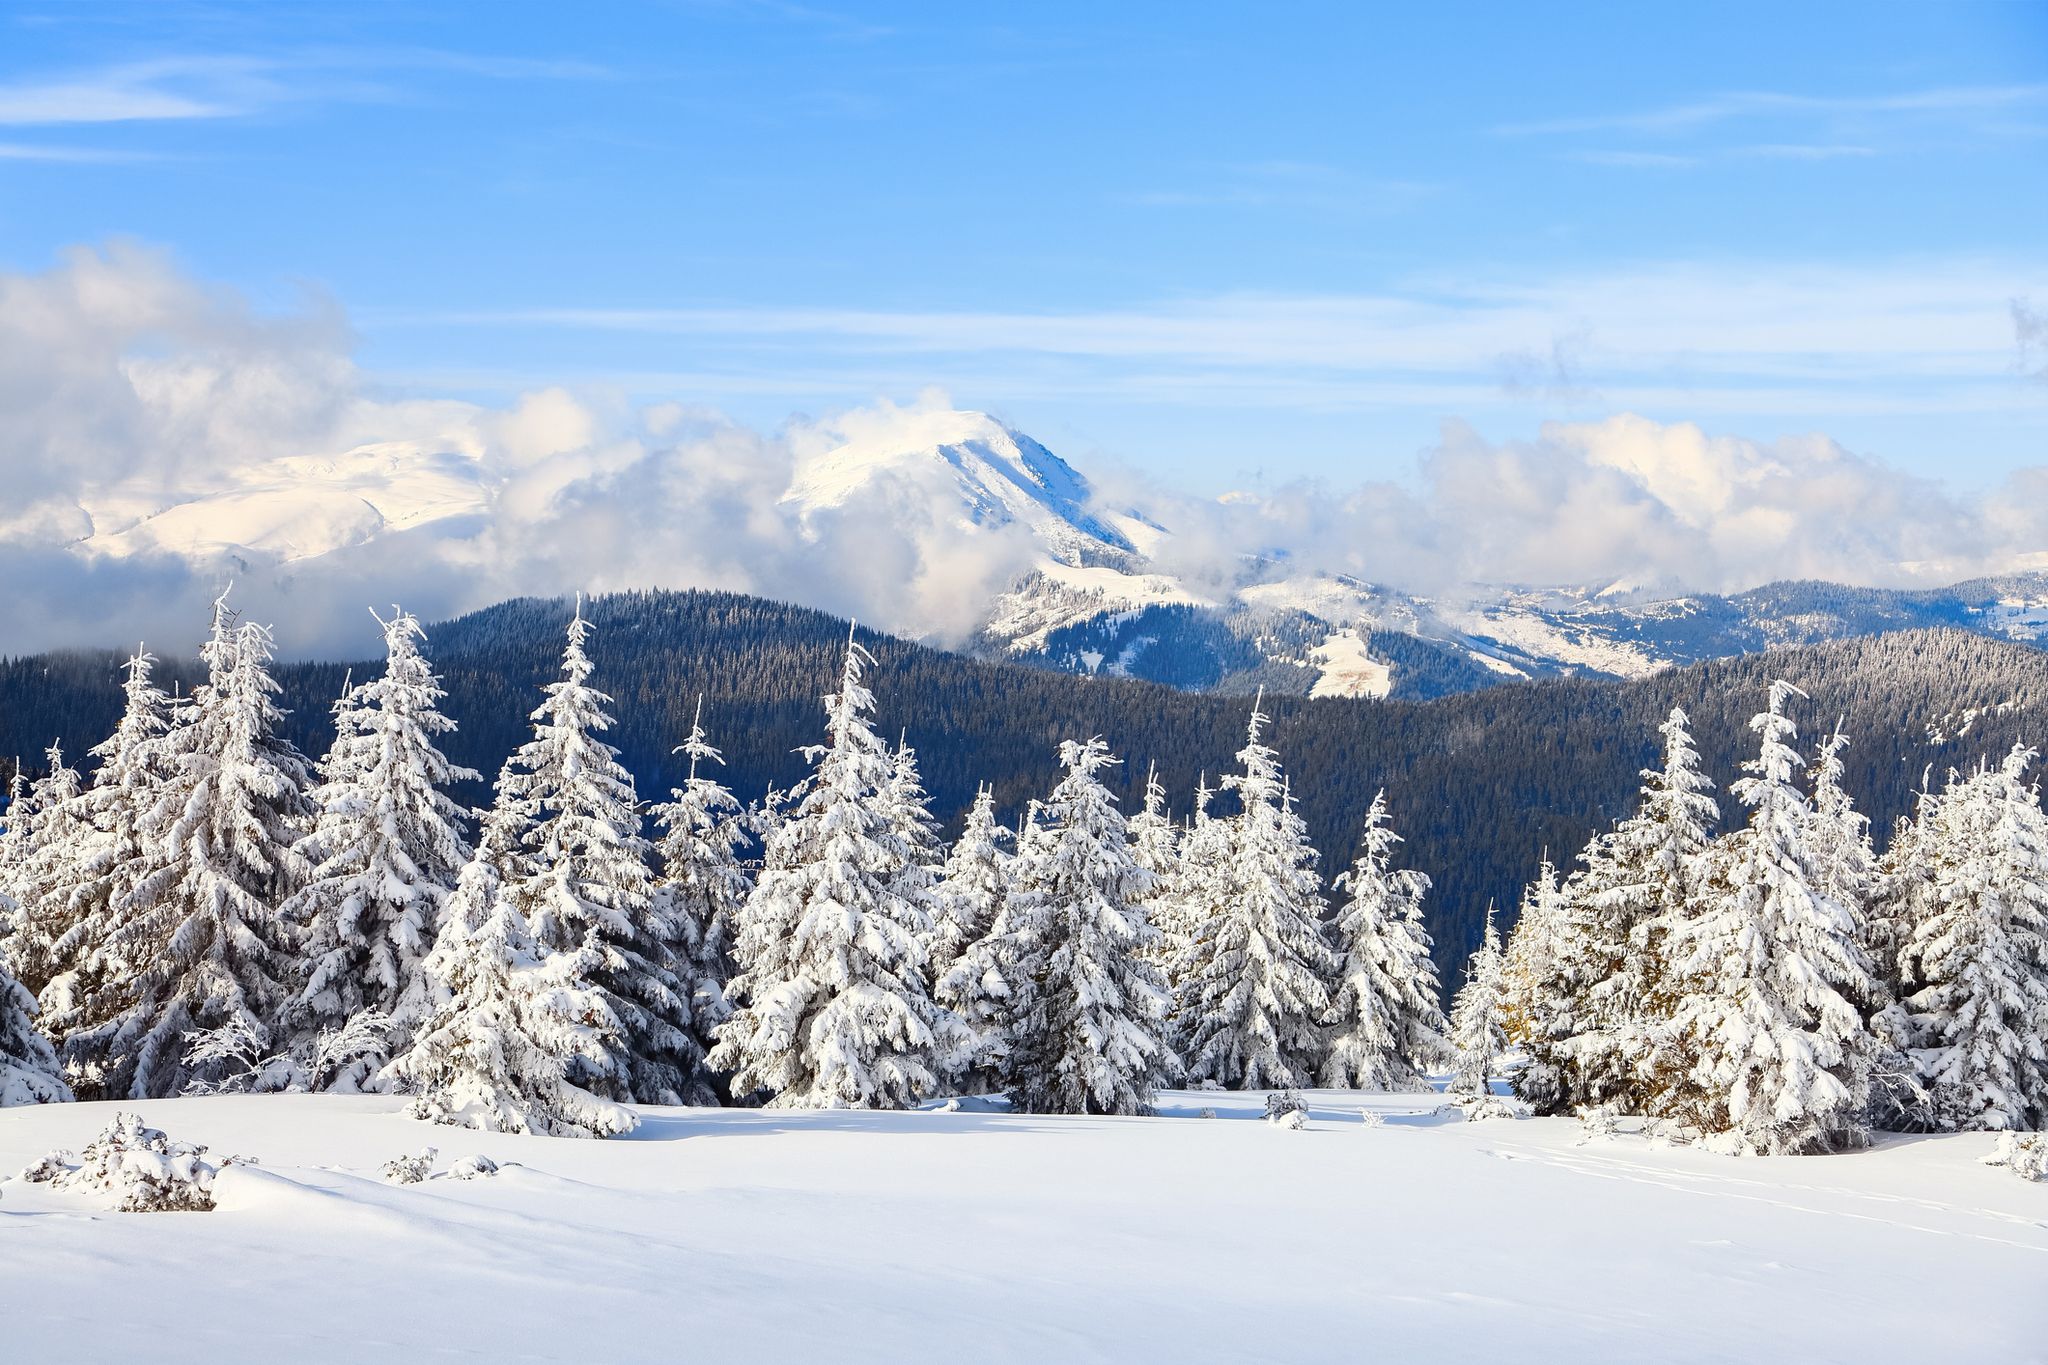 on a frosty beautiful day among high mountains and peaks are magical trees covered with white fluffy snow against the beautiful winter landscape fabulous winter background for a leaflet